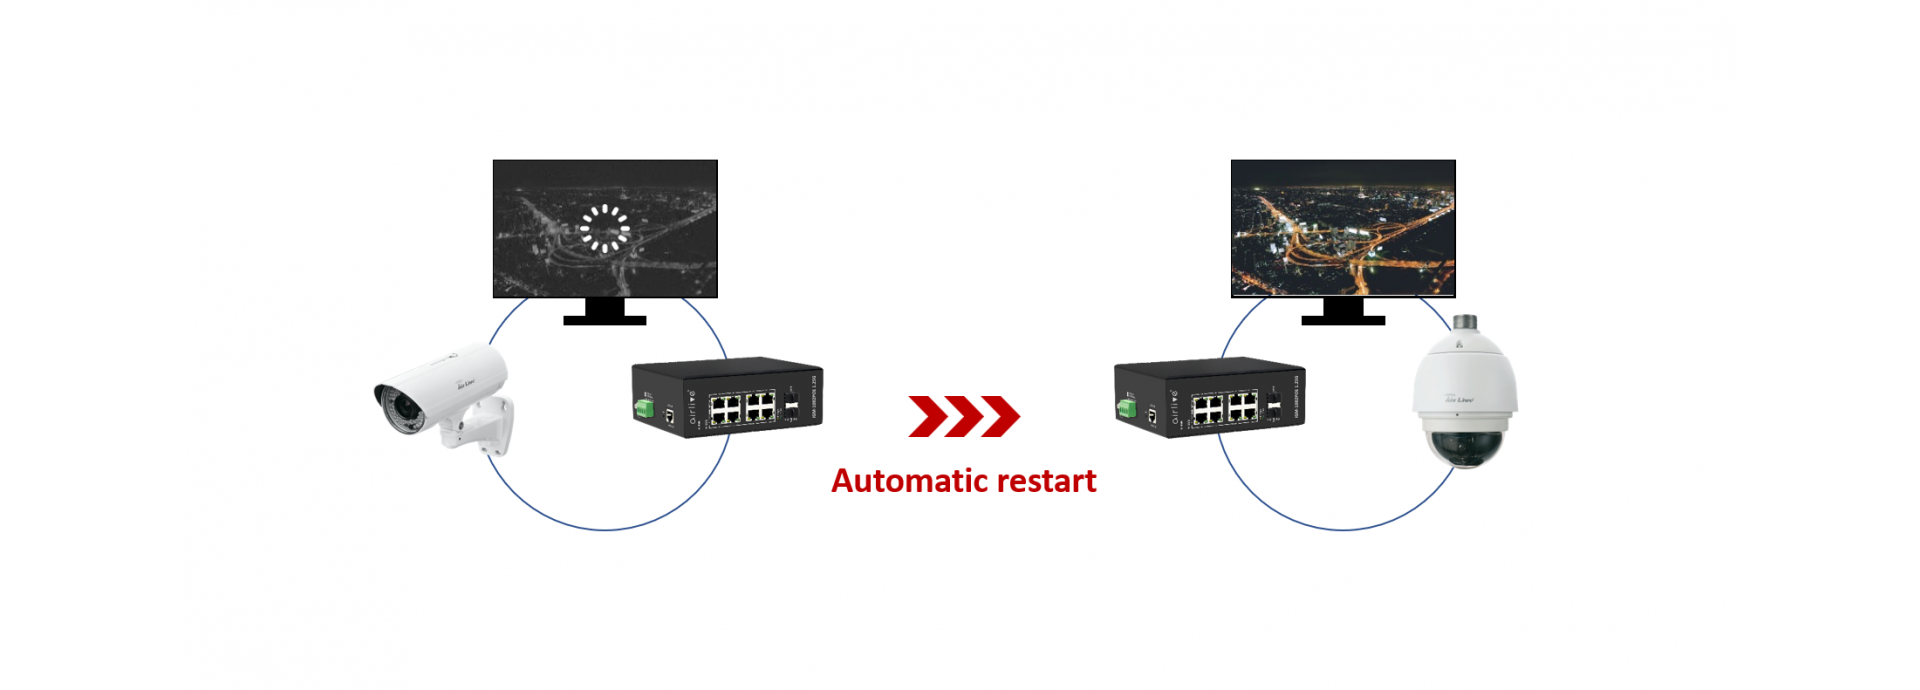 Efficient PoE Watch Guard | PoE Watch dog technology and PoE Management